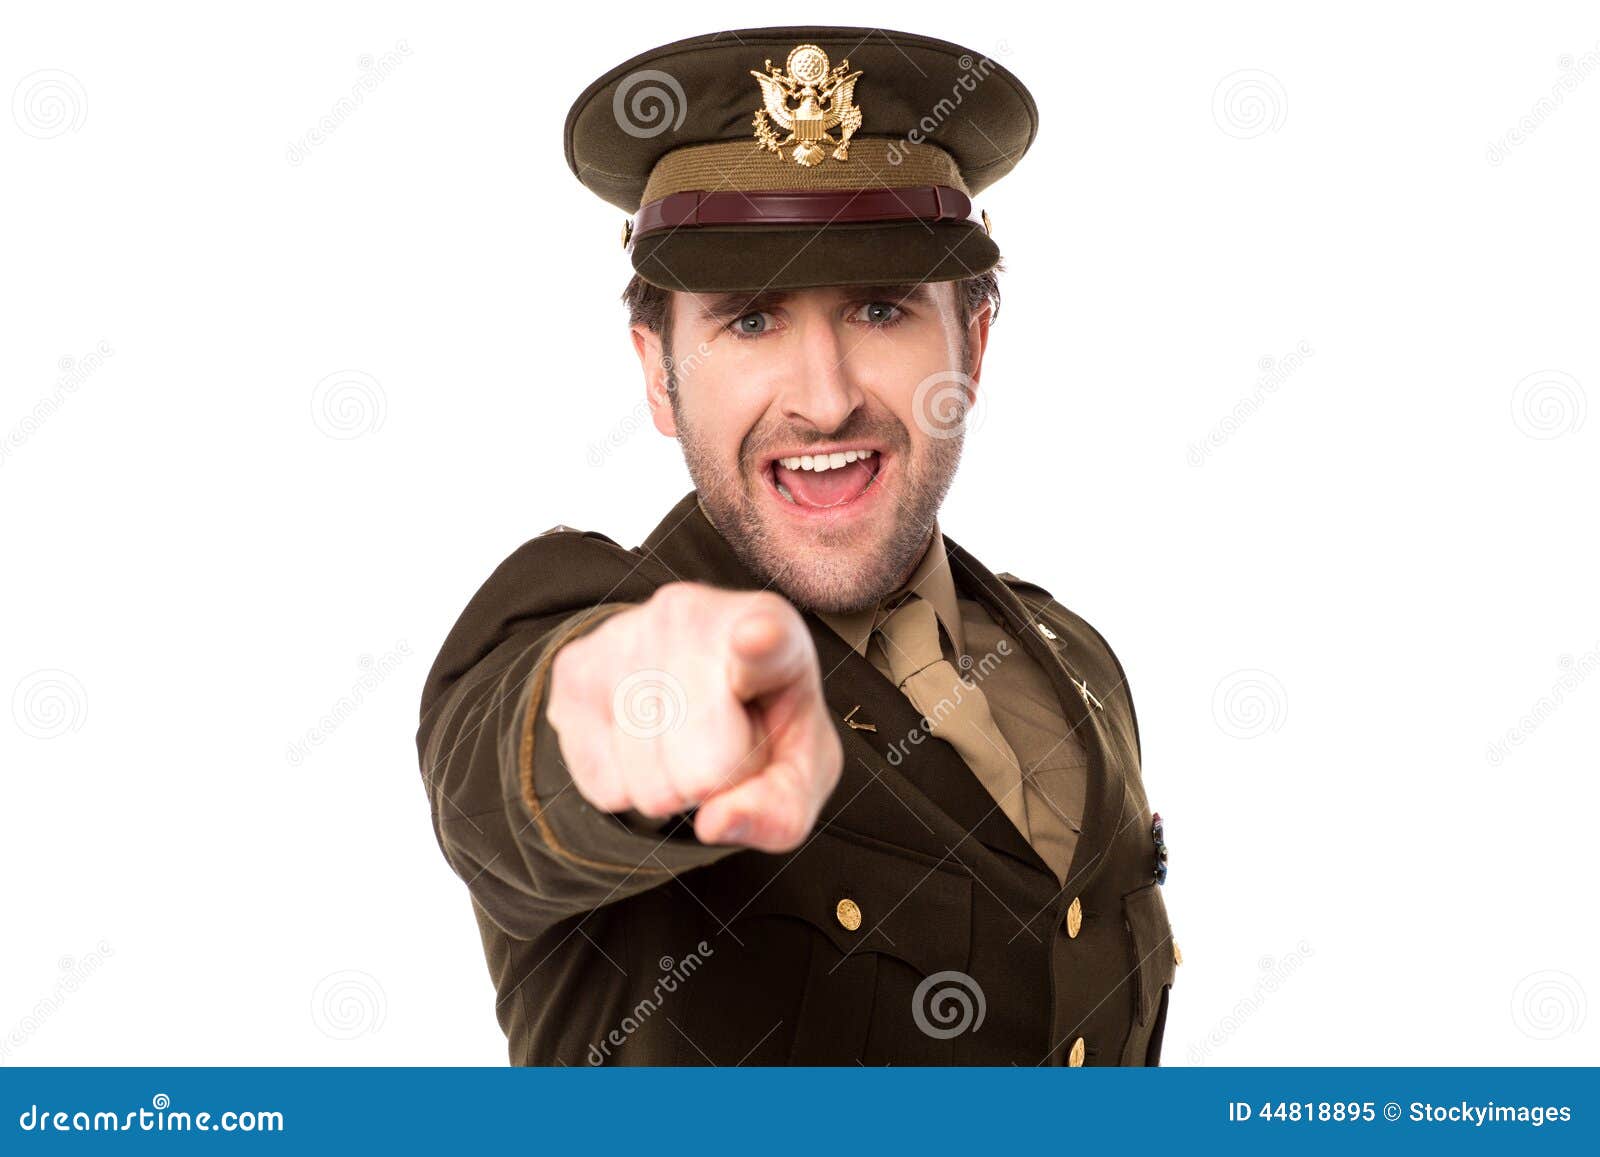 Military Serviceman Pointing You Out Stock Photo - Image: 44818895